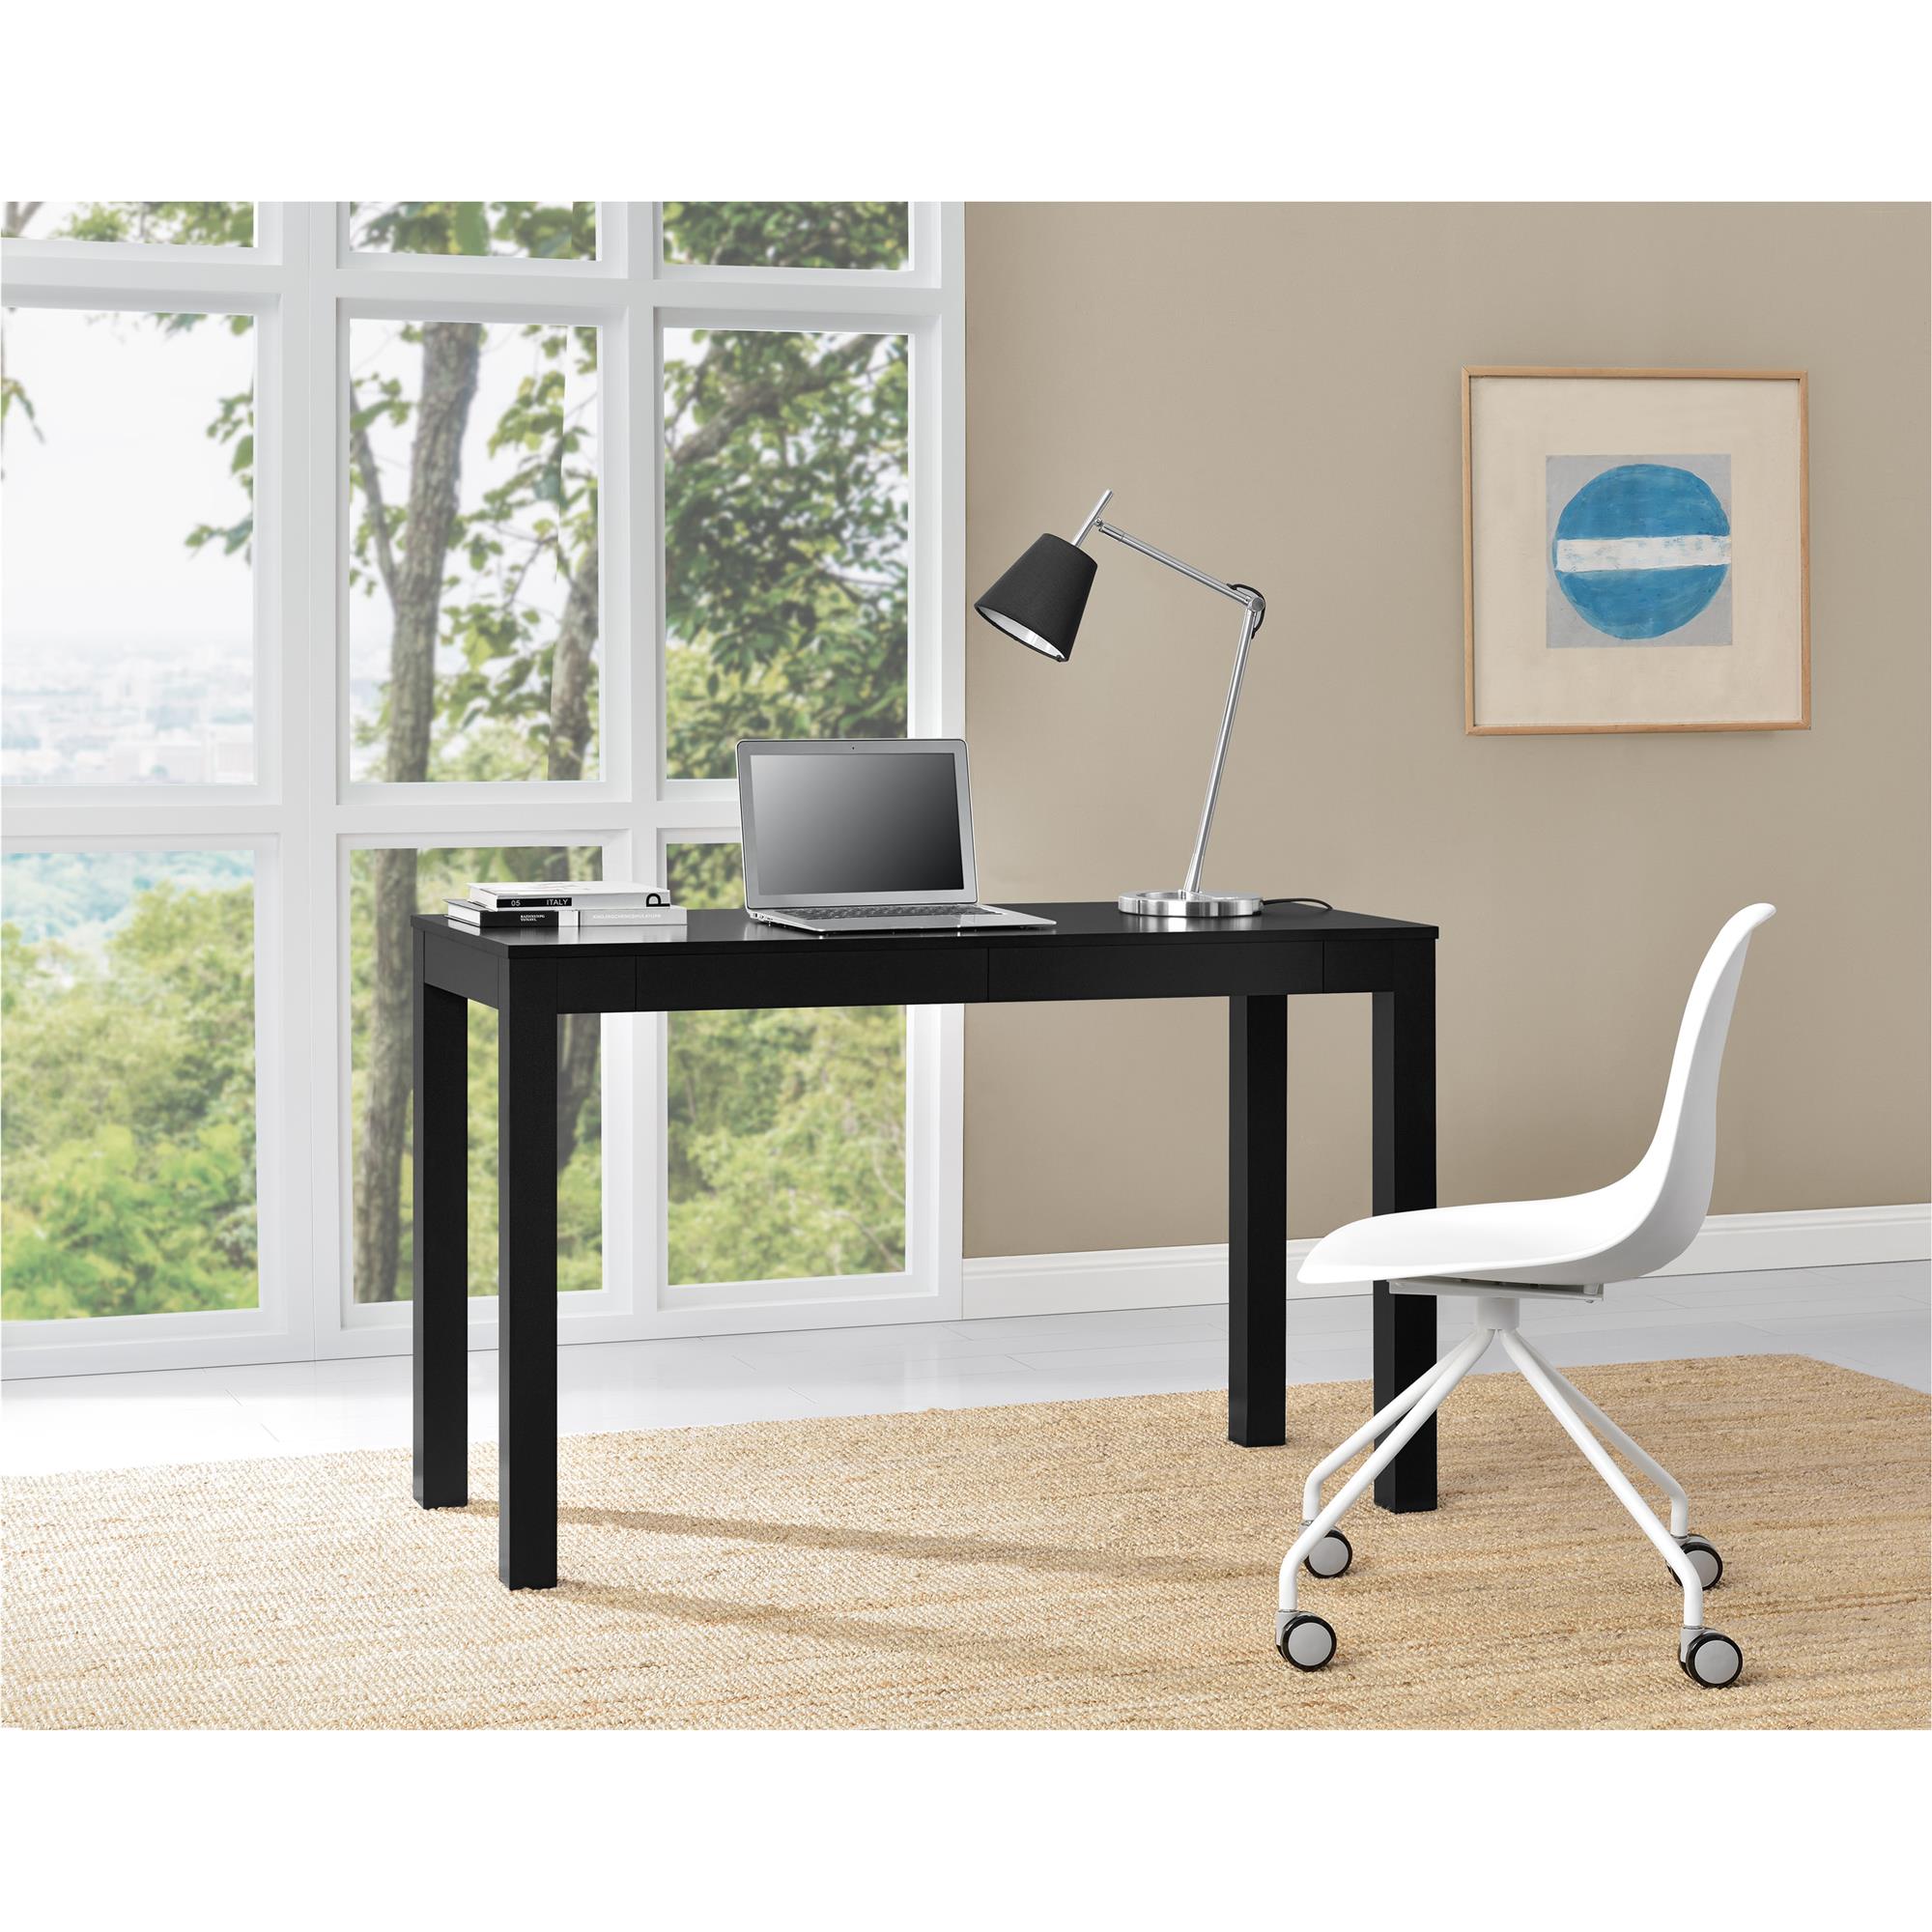 Ameriwood Home Large Parsons Computer Desk with 2 Drawers, Black - image 2 of 8